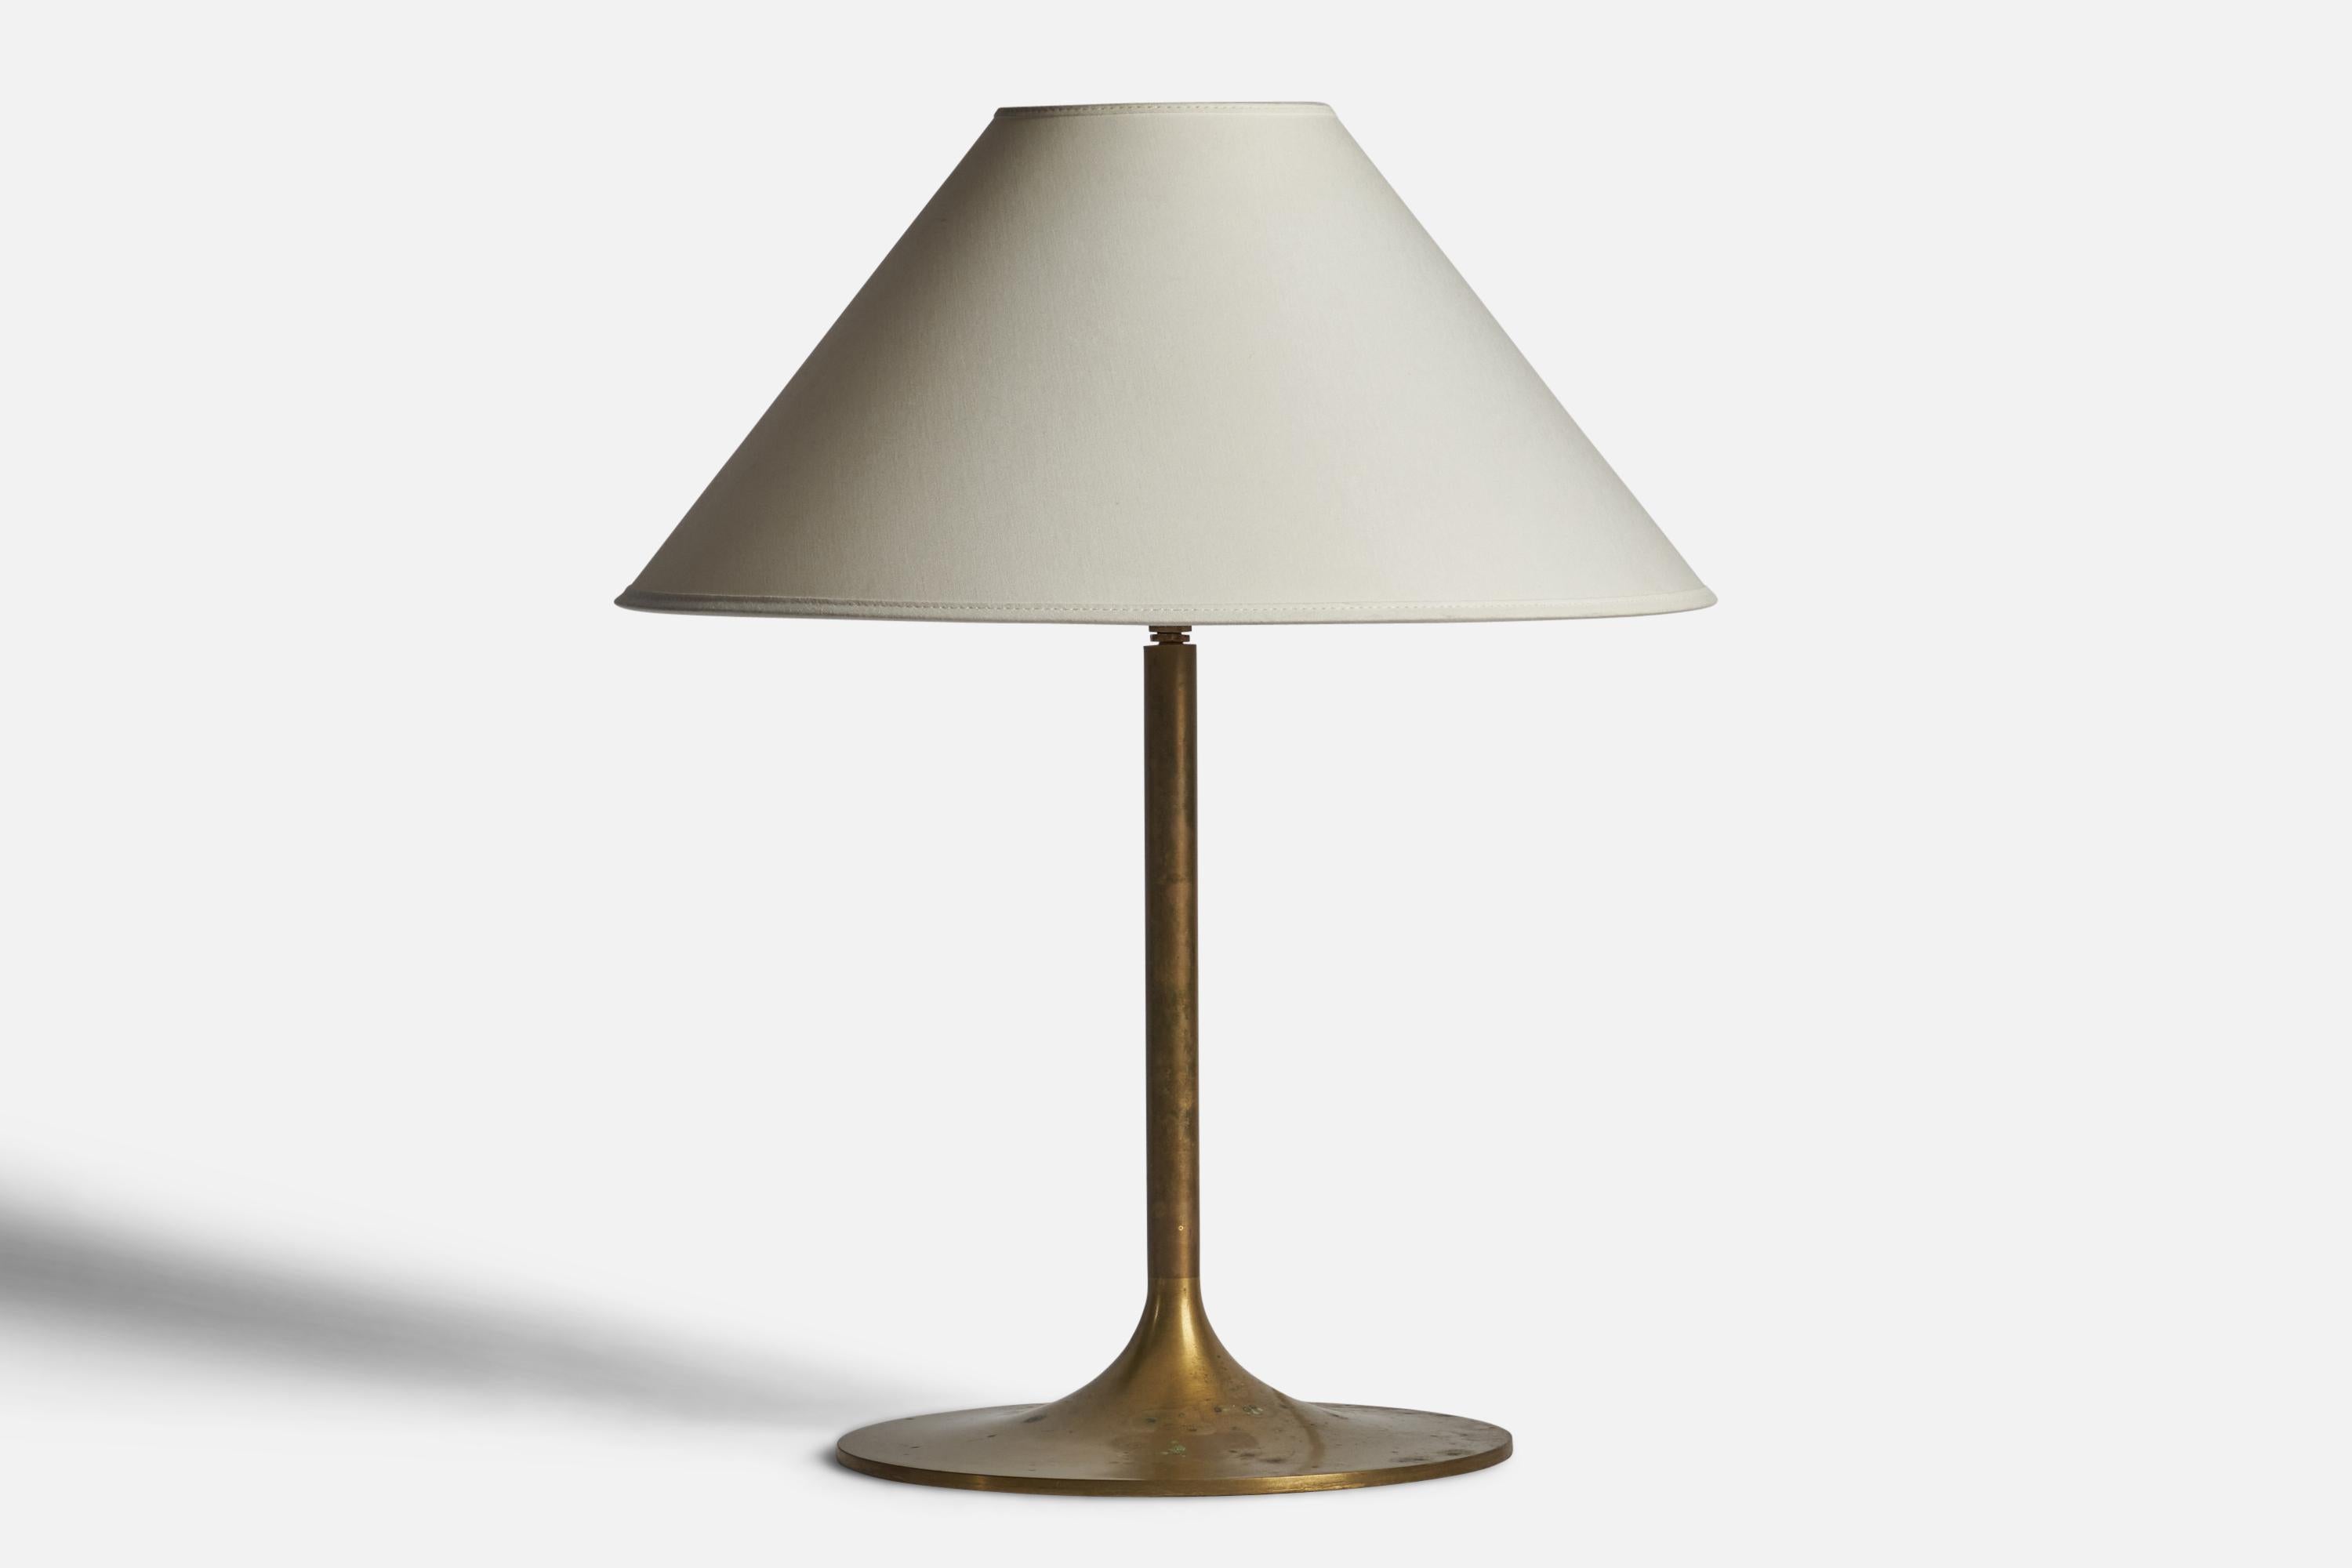 A brass table lamp designed and produced in Sweden, 1950s.

Dimensions of Lamp (inches): 15” H x 9.75” Diameter
Dimensions of Shade (inches): 4.75” Top Diameter x 16” Bottom Diameter x 9” H 
Dimensions of Lamp with Shade (inches): 19.5” H x 16”